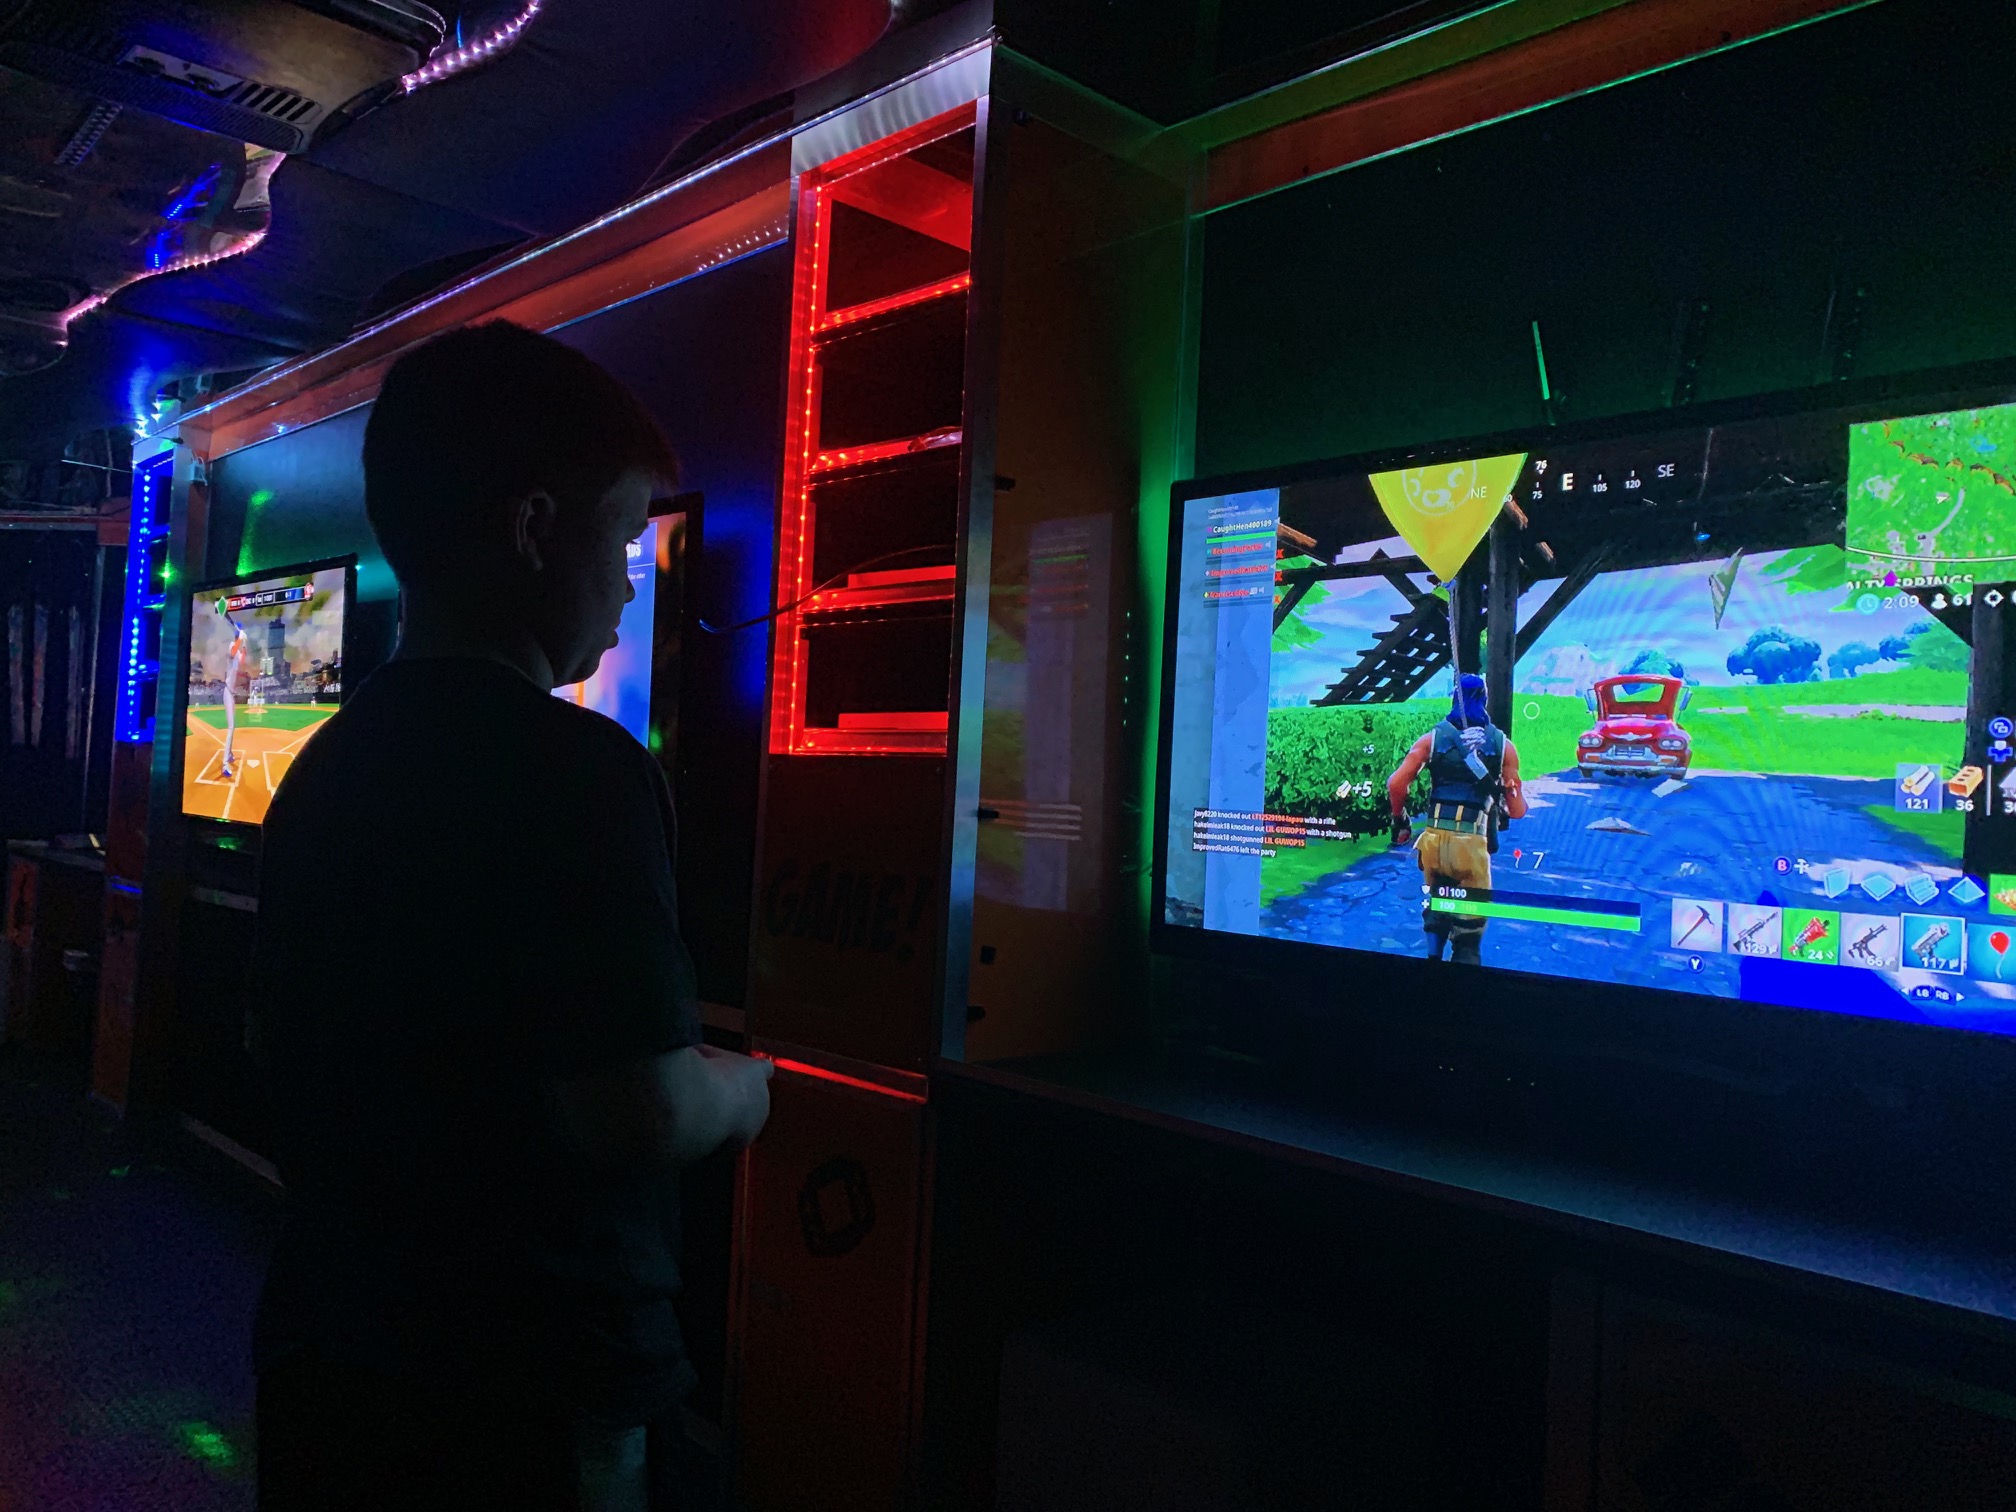 Video Game Truck and Laser Tag Parties in Greensboro NC